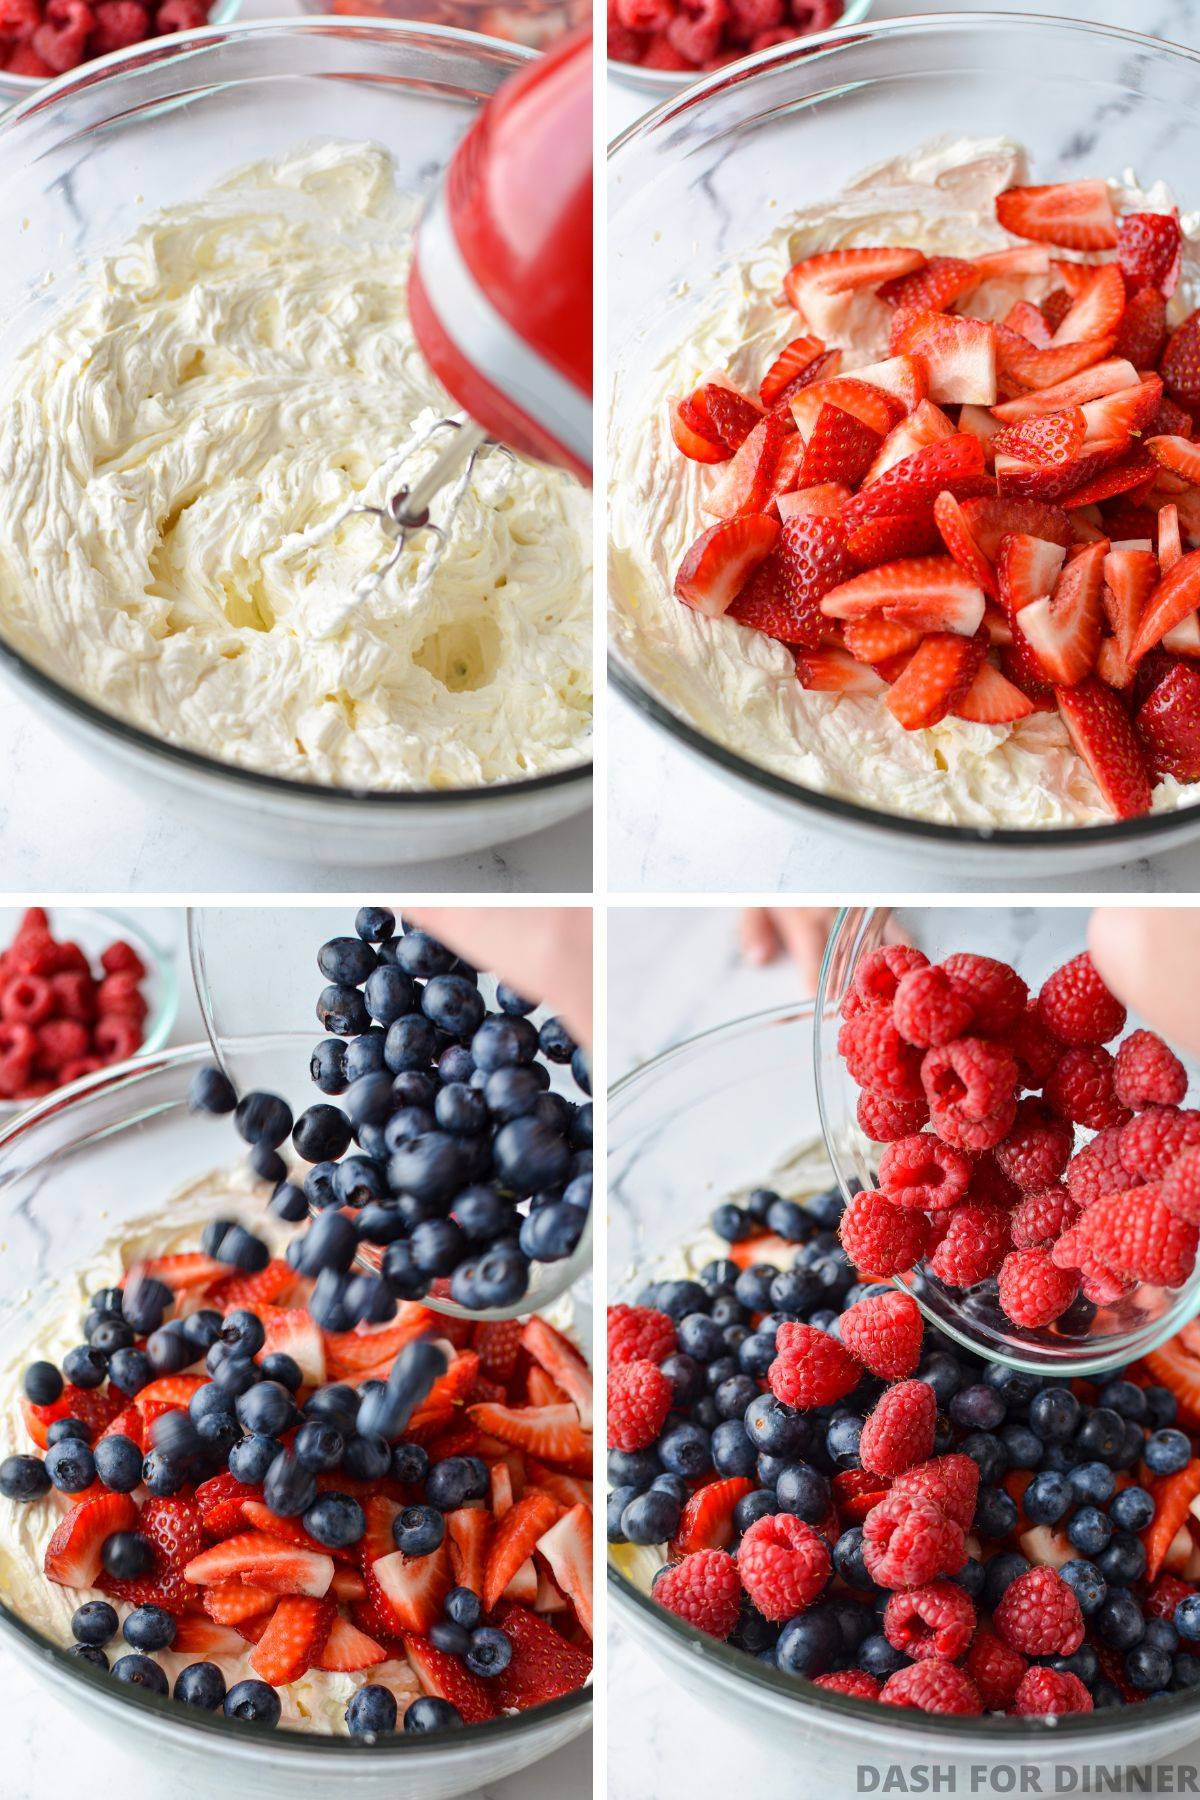 Adding the berries to a combination of cream cheese and cool whip.